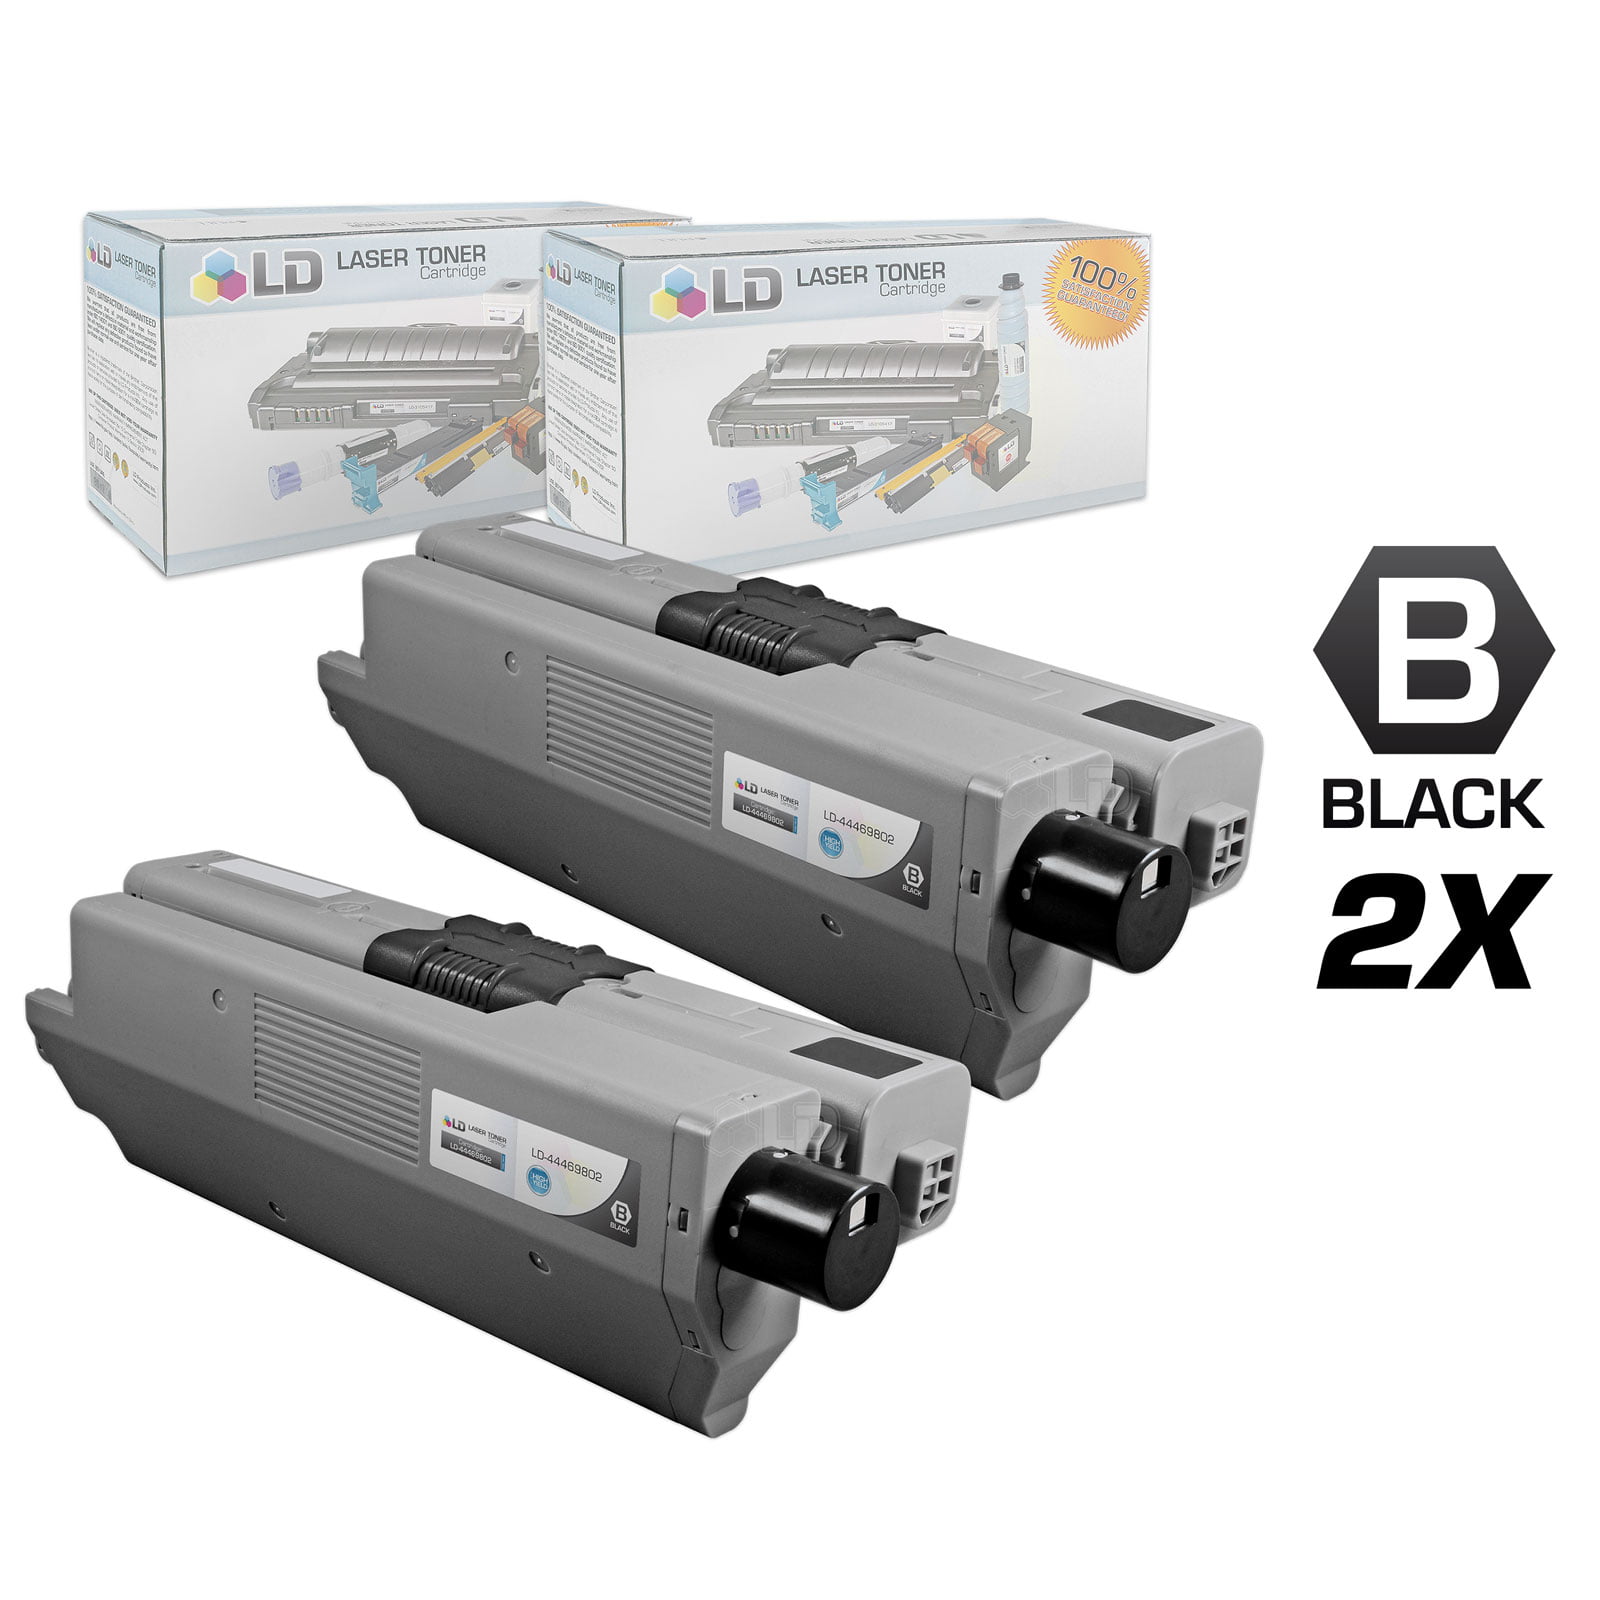 Compatible Replacements for Okidata Type C17 Set of 2 High Yie Laser Toner Cartridges: 2 44469802 Black for us in Oki C530dn, C531dn, MC561, MC562w, MC890, MC950, and MC950 MFP s - Walmart.com